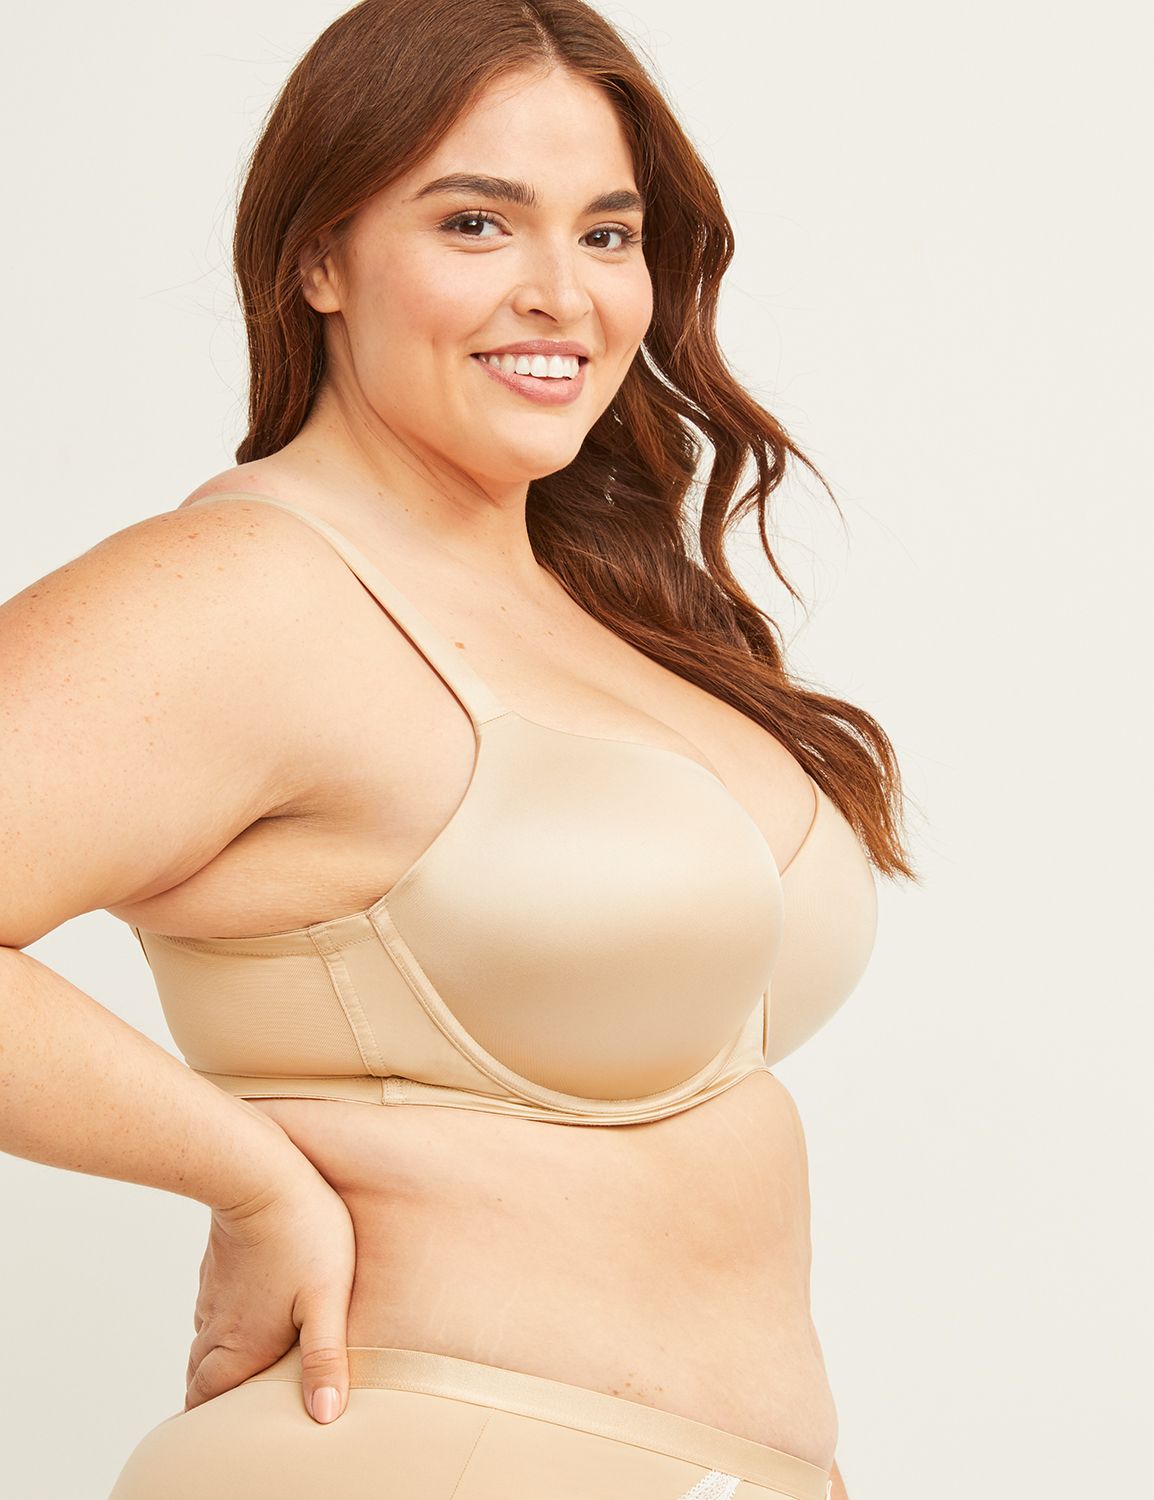 Cacique LANE BRYANT Plus Size Lightly Lined Balconette Bra Wired Nude Beige  40D - $26 - From MadiKay